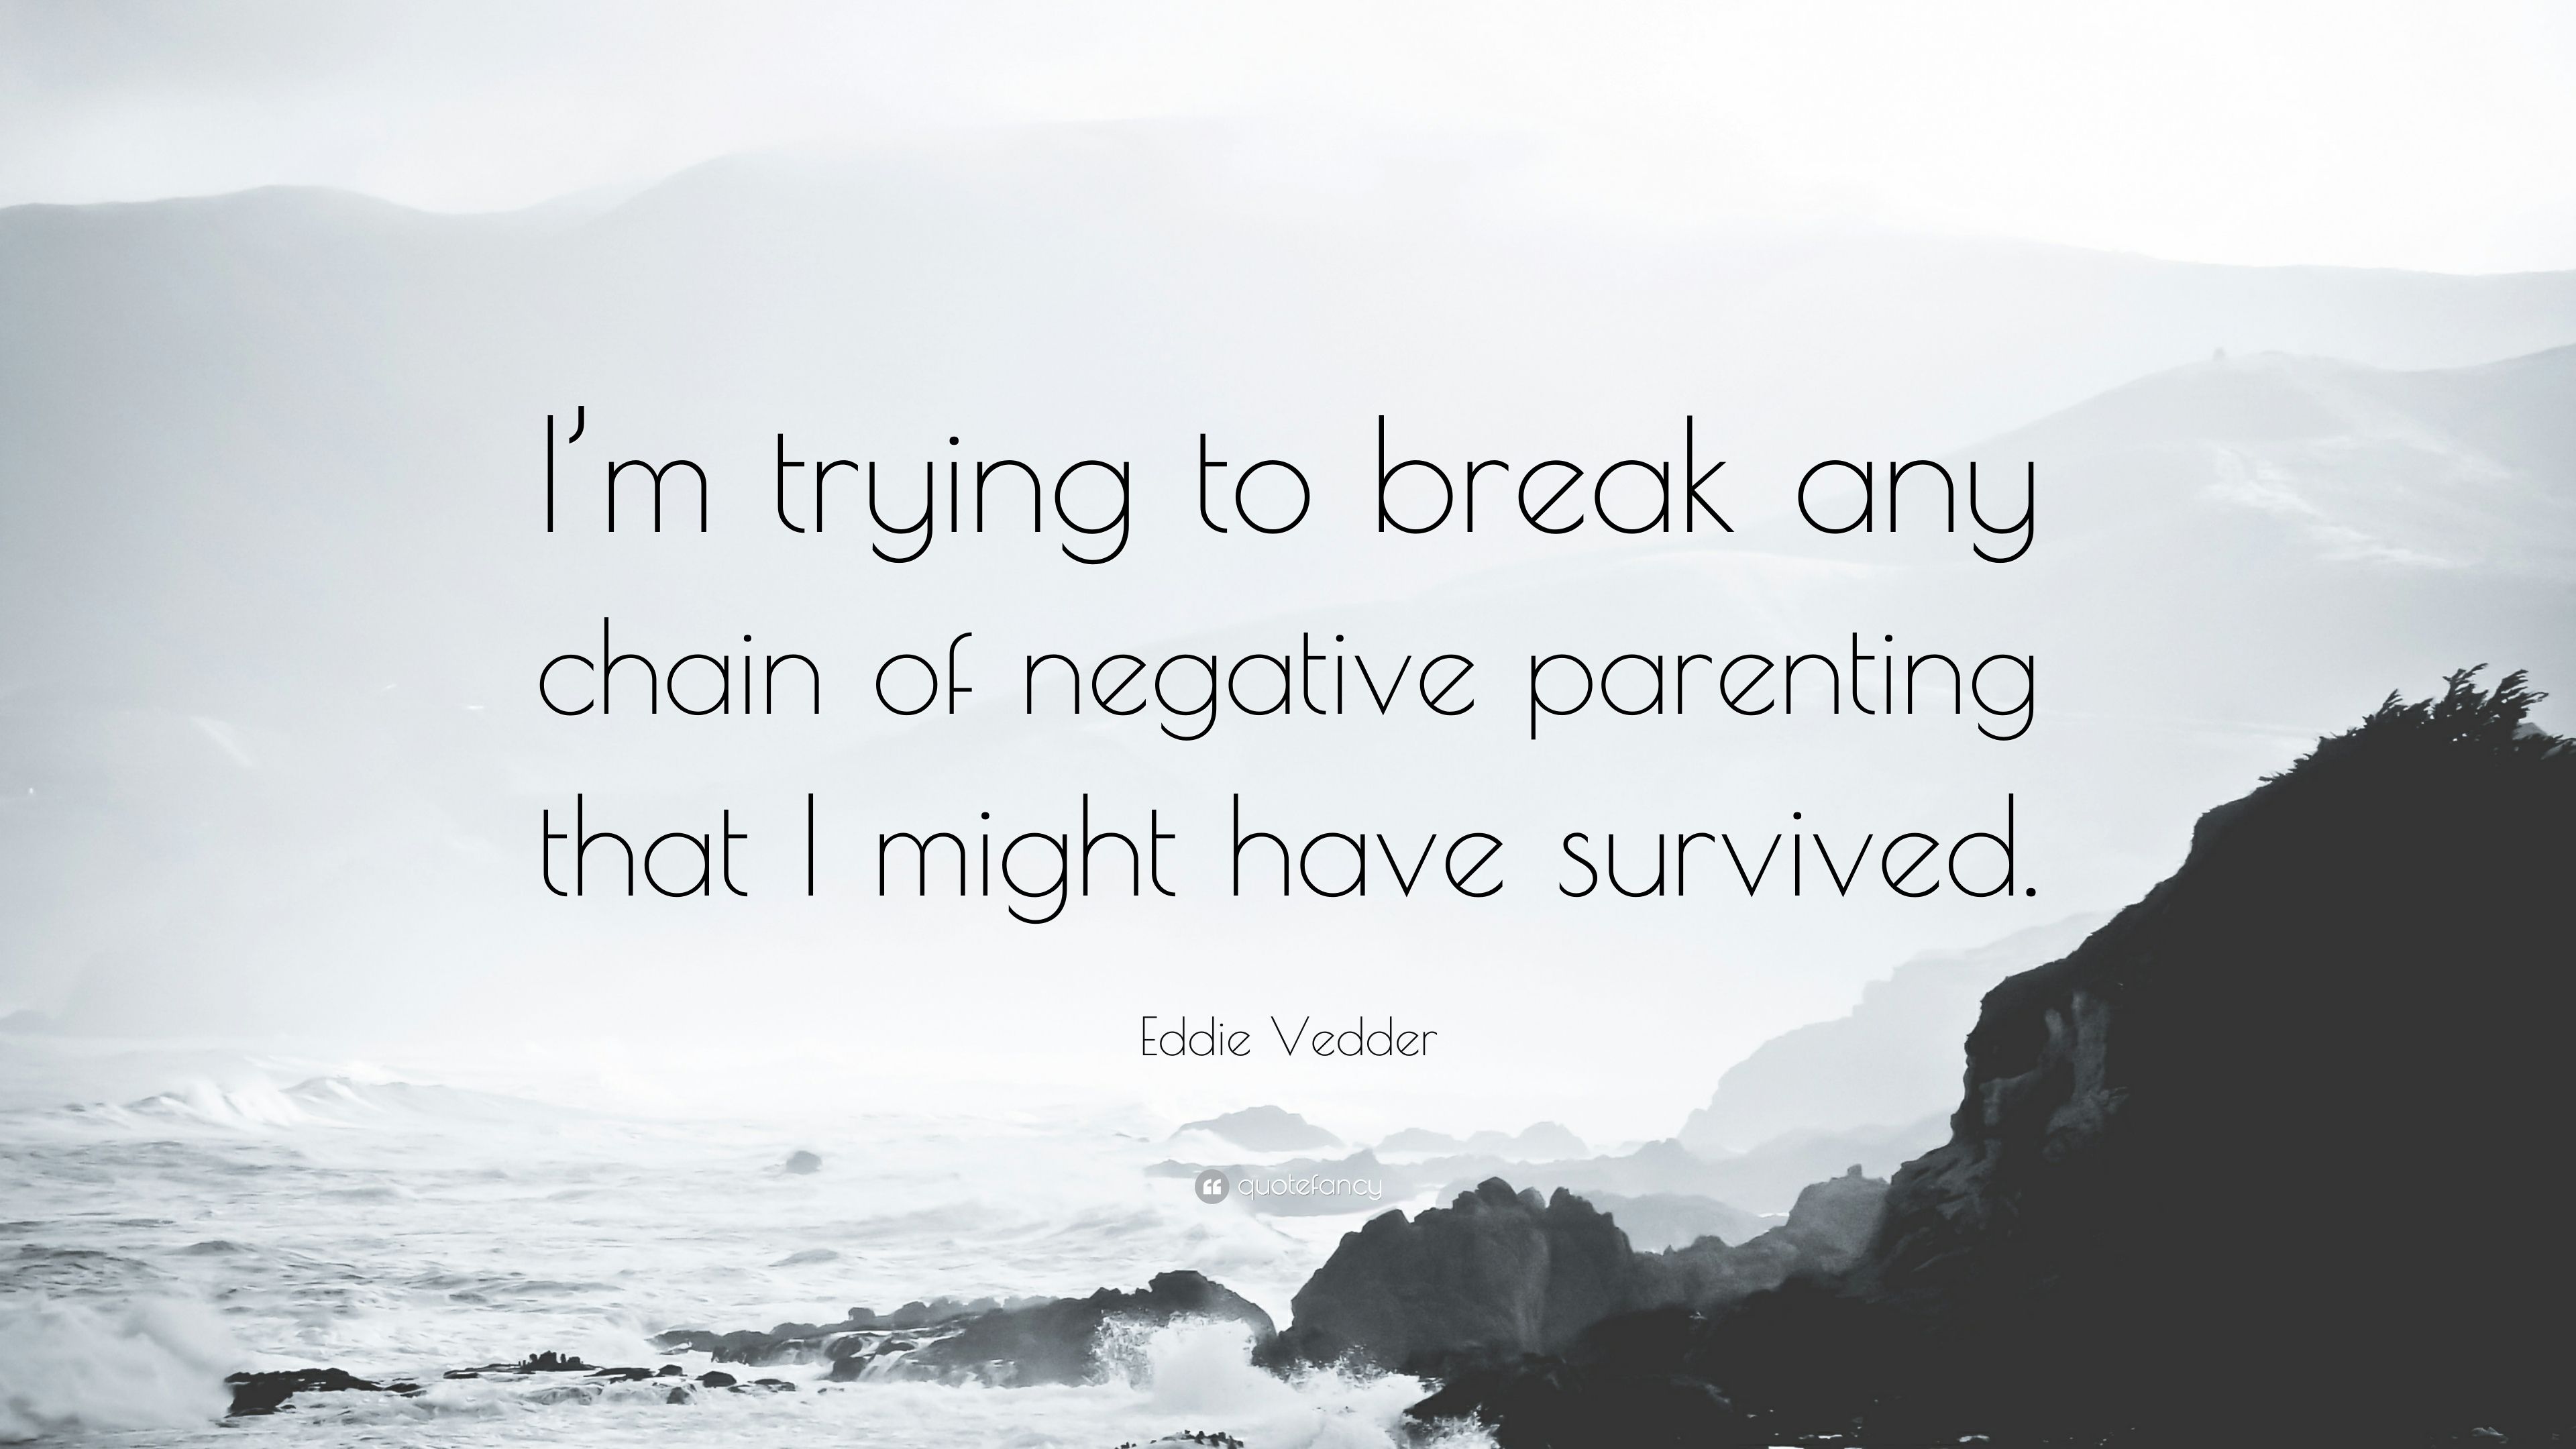 Eddie Vedder Quote: “I'm trying to break any chain of negative parenting that I might have survived.” (10 wallpaper)